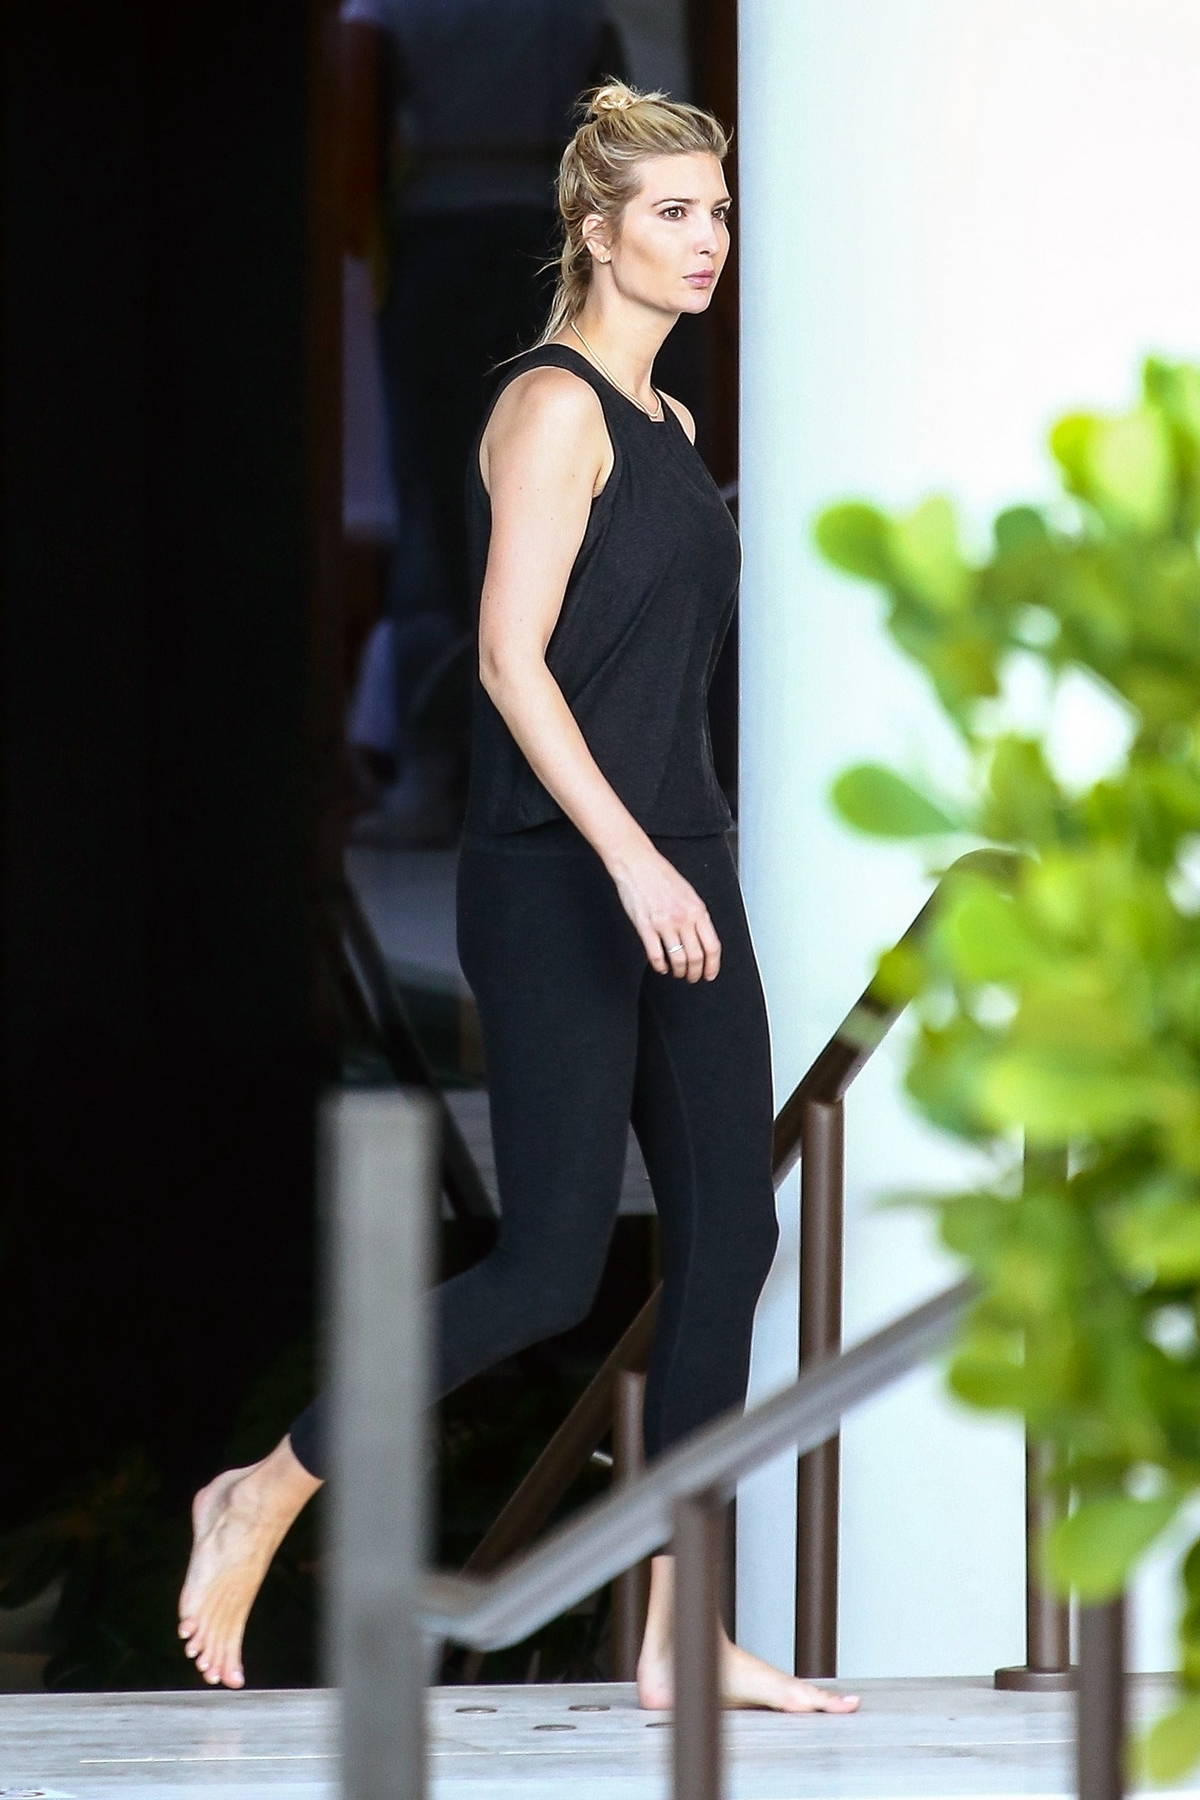 Ivanka Trump spotted in a black tank top and leggings while enjoying an